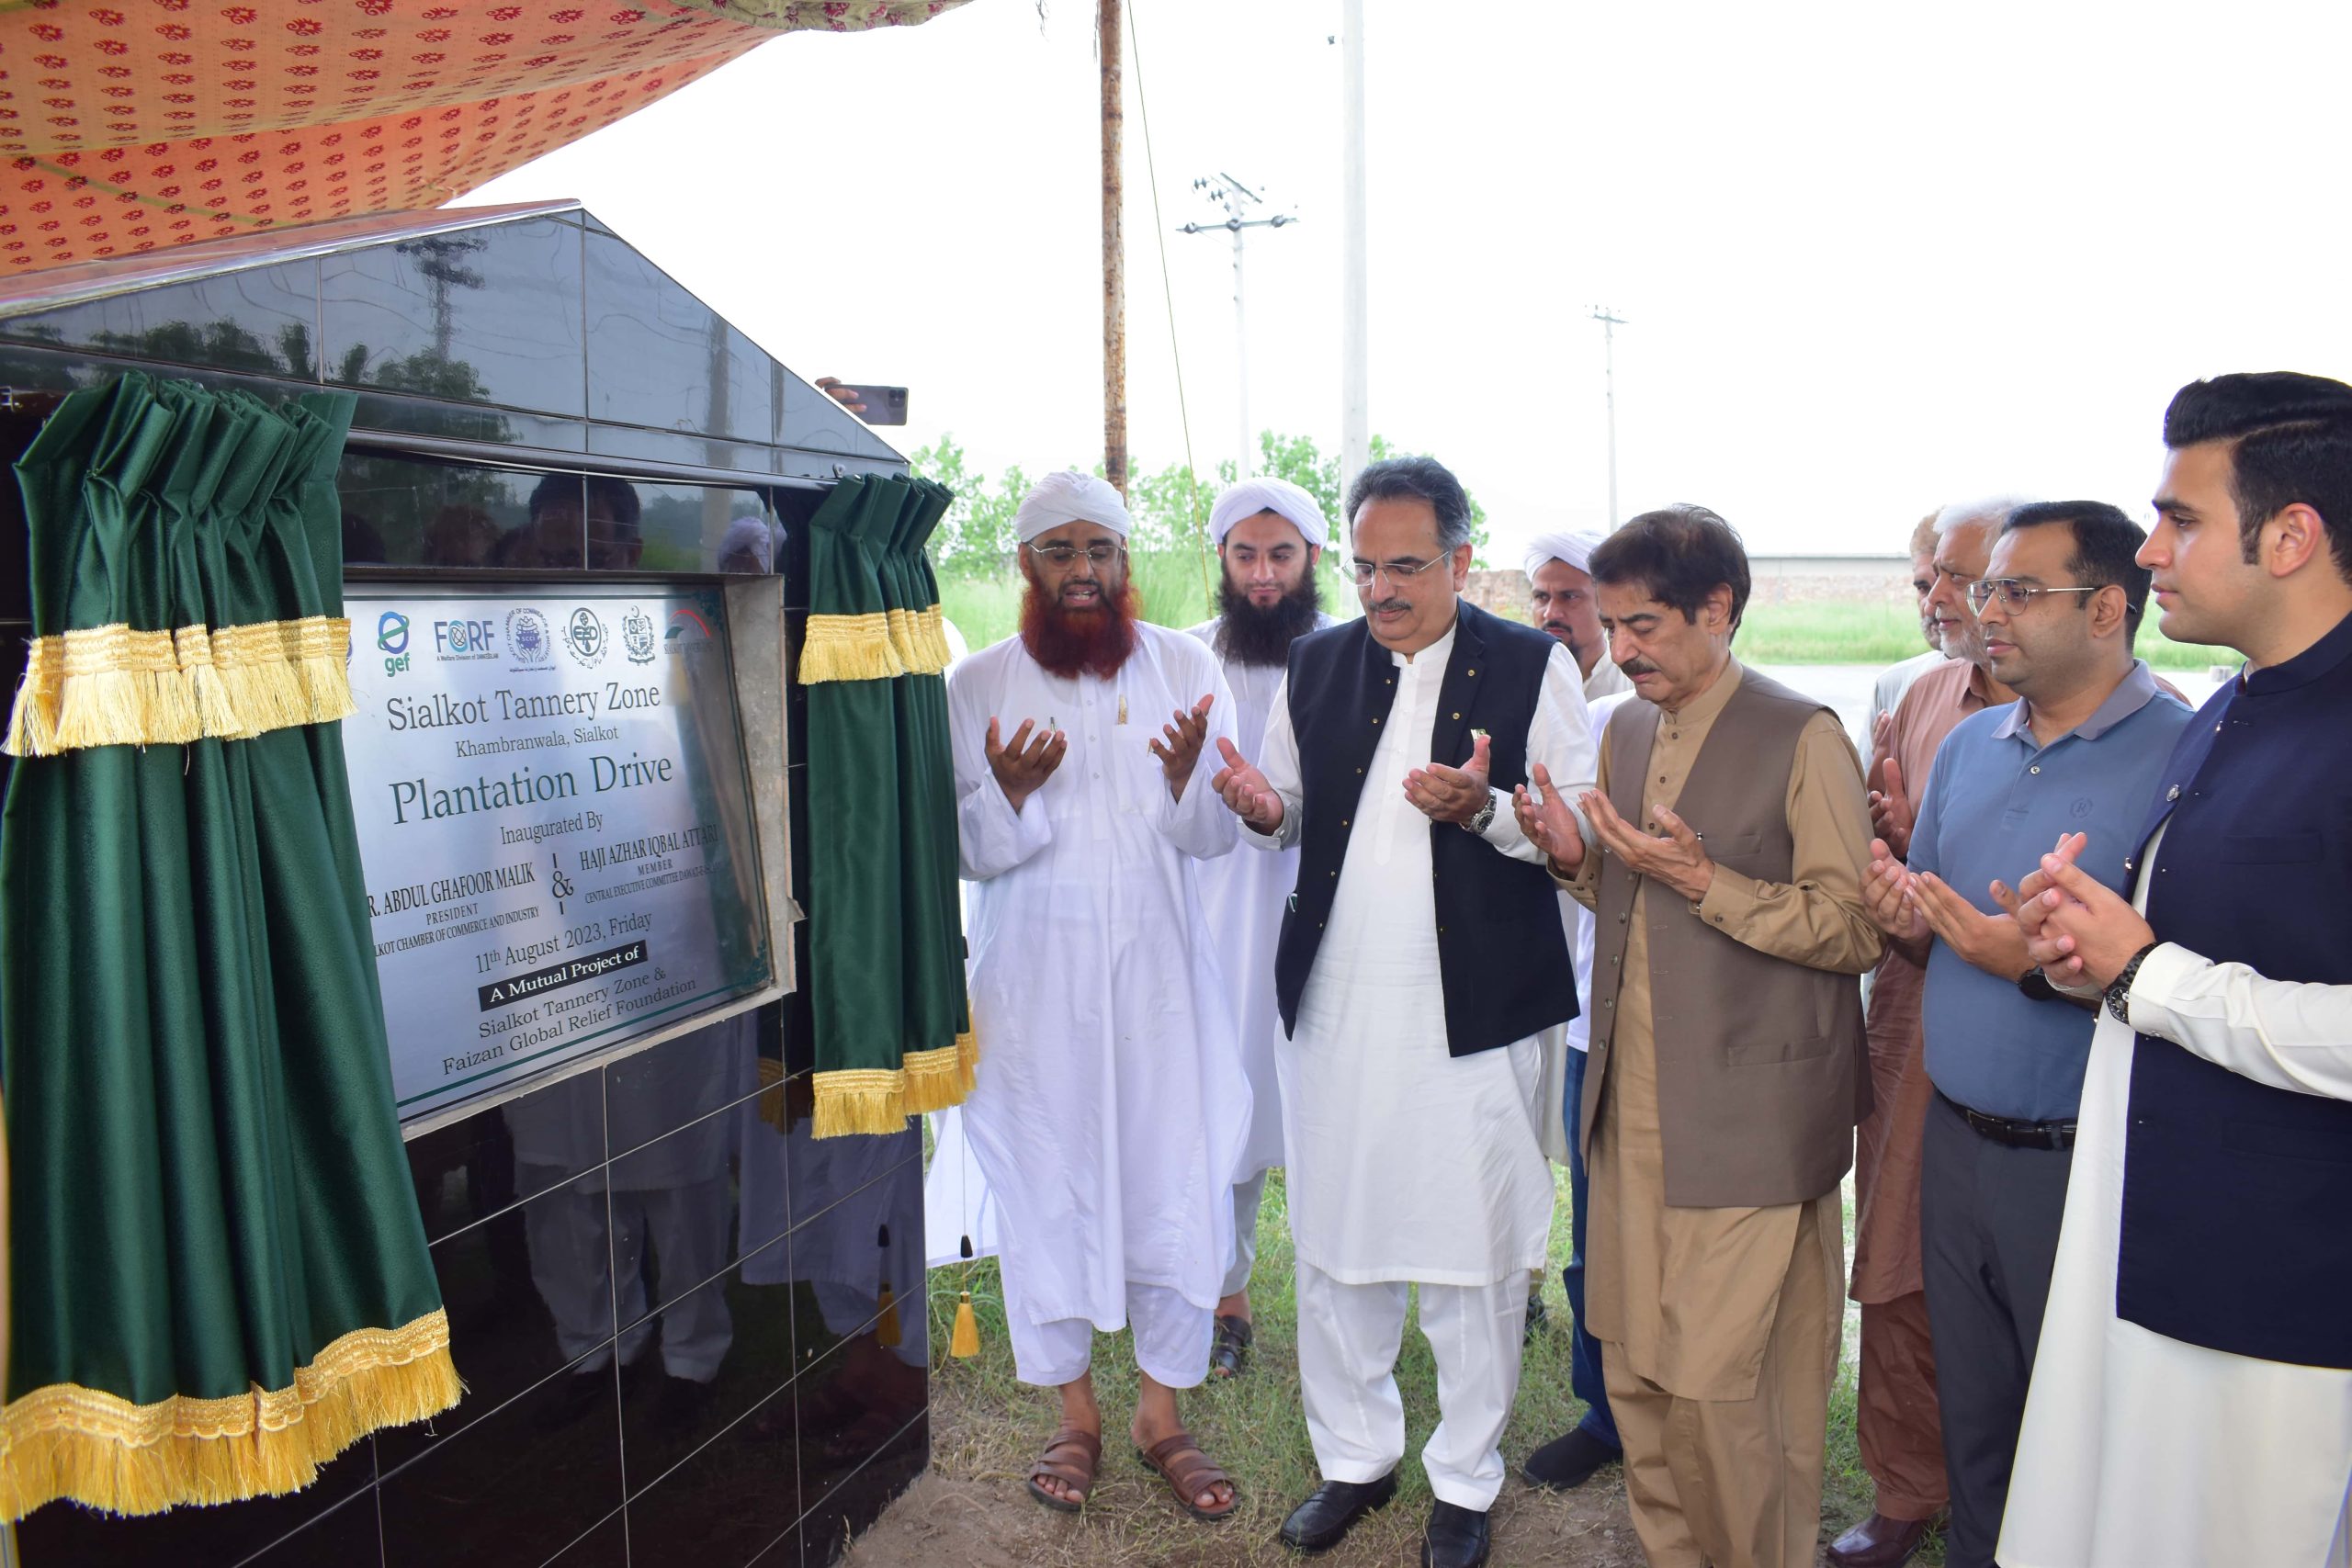 On August 11, 2023, Mr. Abdul Ghafoor Malik, President, and Mr. Wahub Jahangir, Senior Vice President of the Sialkot Chamber of Commerce & Industry, participated in the ‘Sialkot Tannery Zone Monsoon Tree Plantation Drive’ at Khambranwala, Sialkot. During his speech at the event, Mr. Malik announced that the Sialkot Chamber would donate 3000 plants for the plantation drive initiated by the Sialkot Tannery Zone.